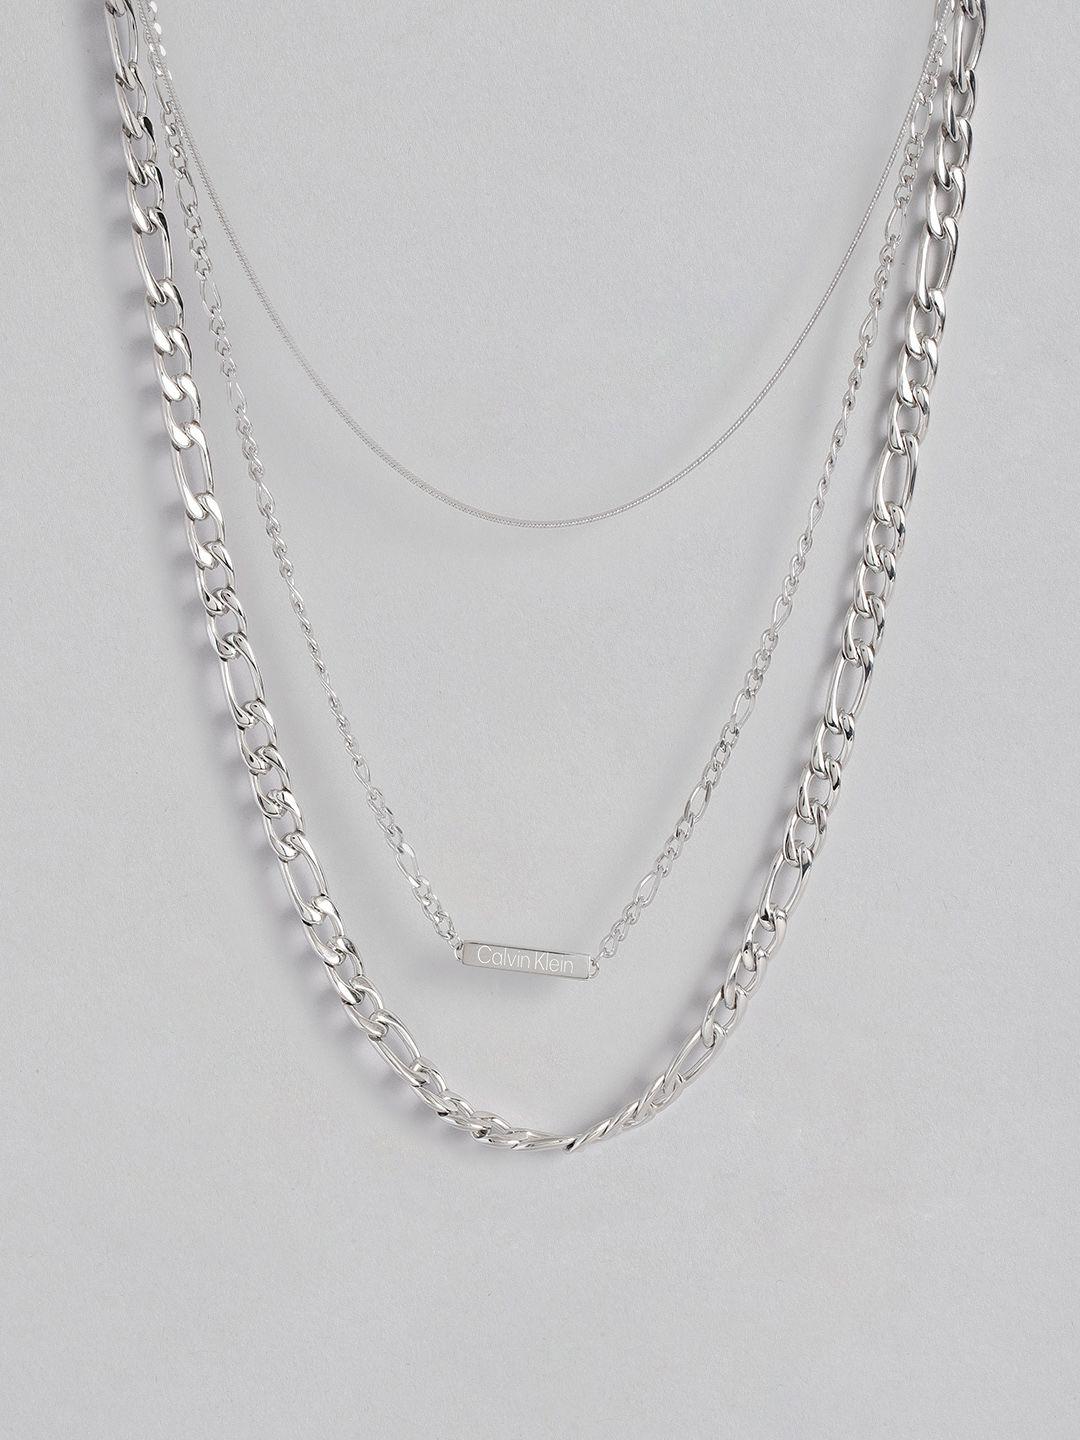 calvin klein pack of 3 necklaces